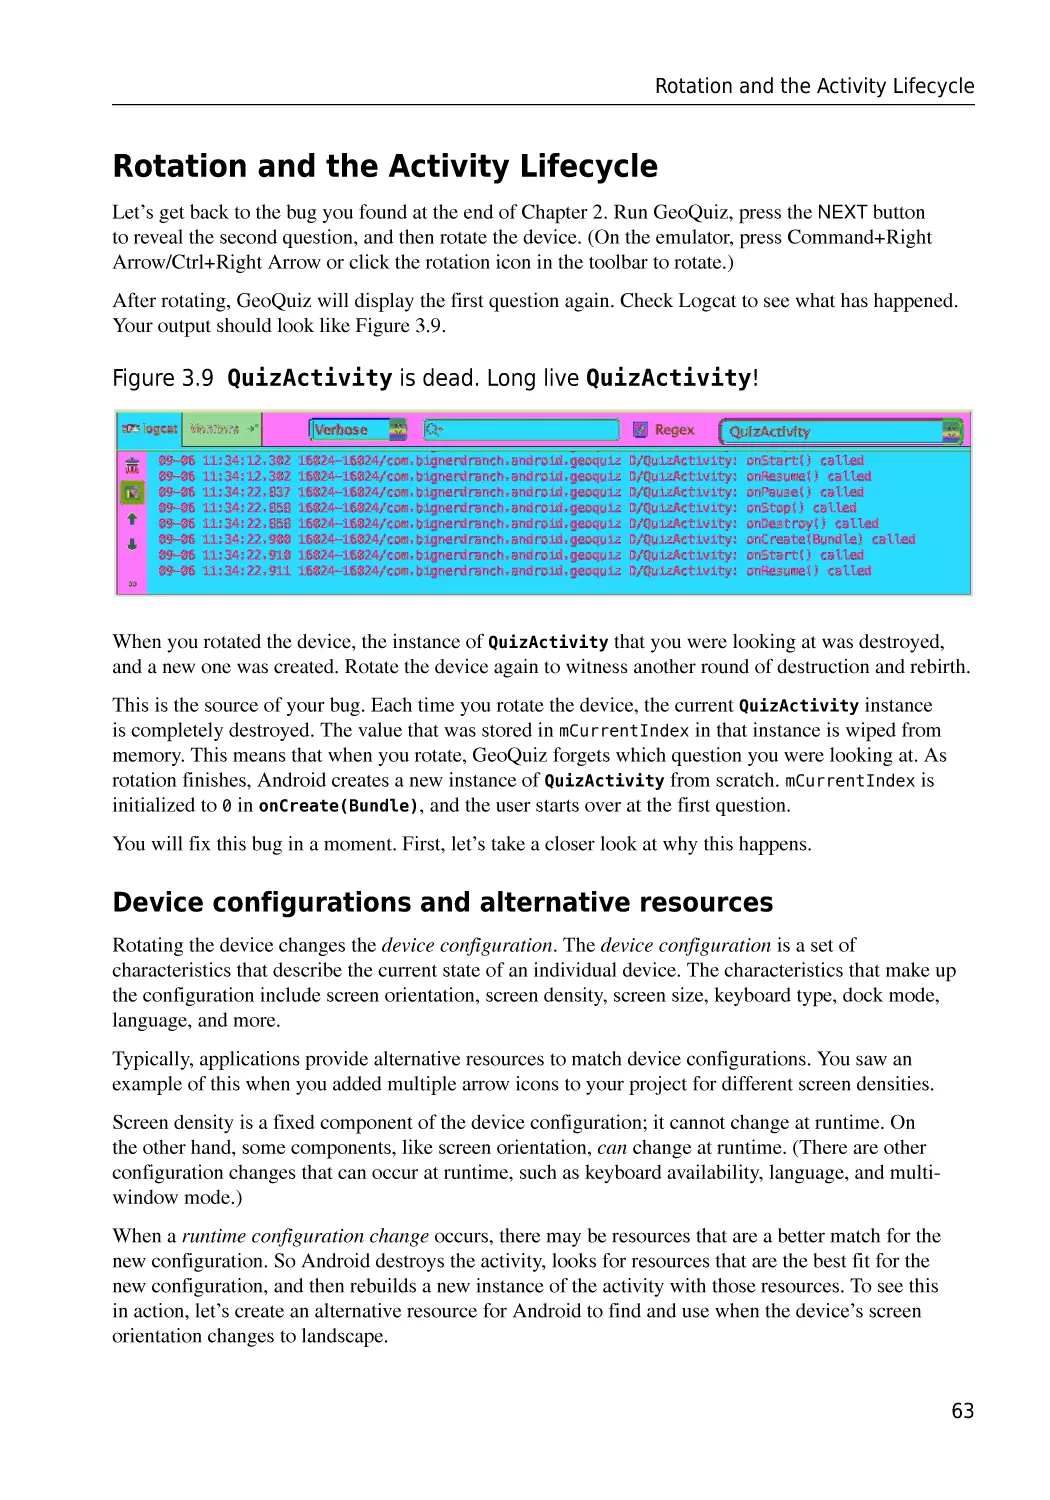 Rotation and the Activity Lifecycle
Device configurations and alternative resources